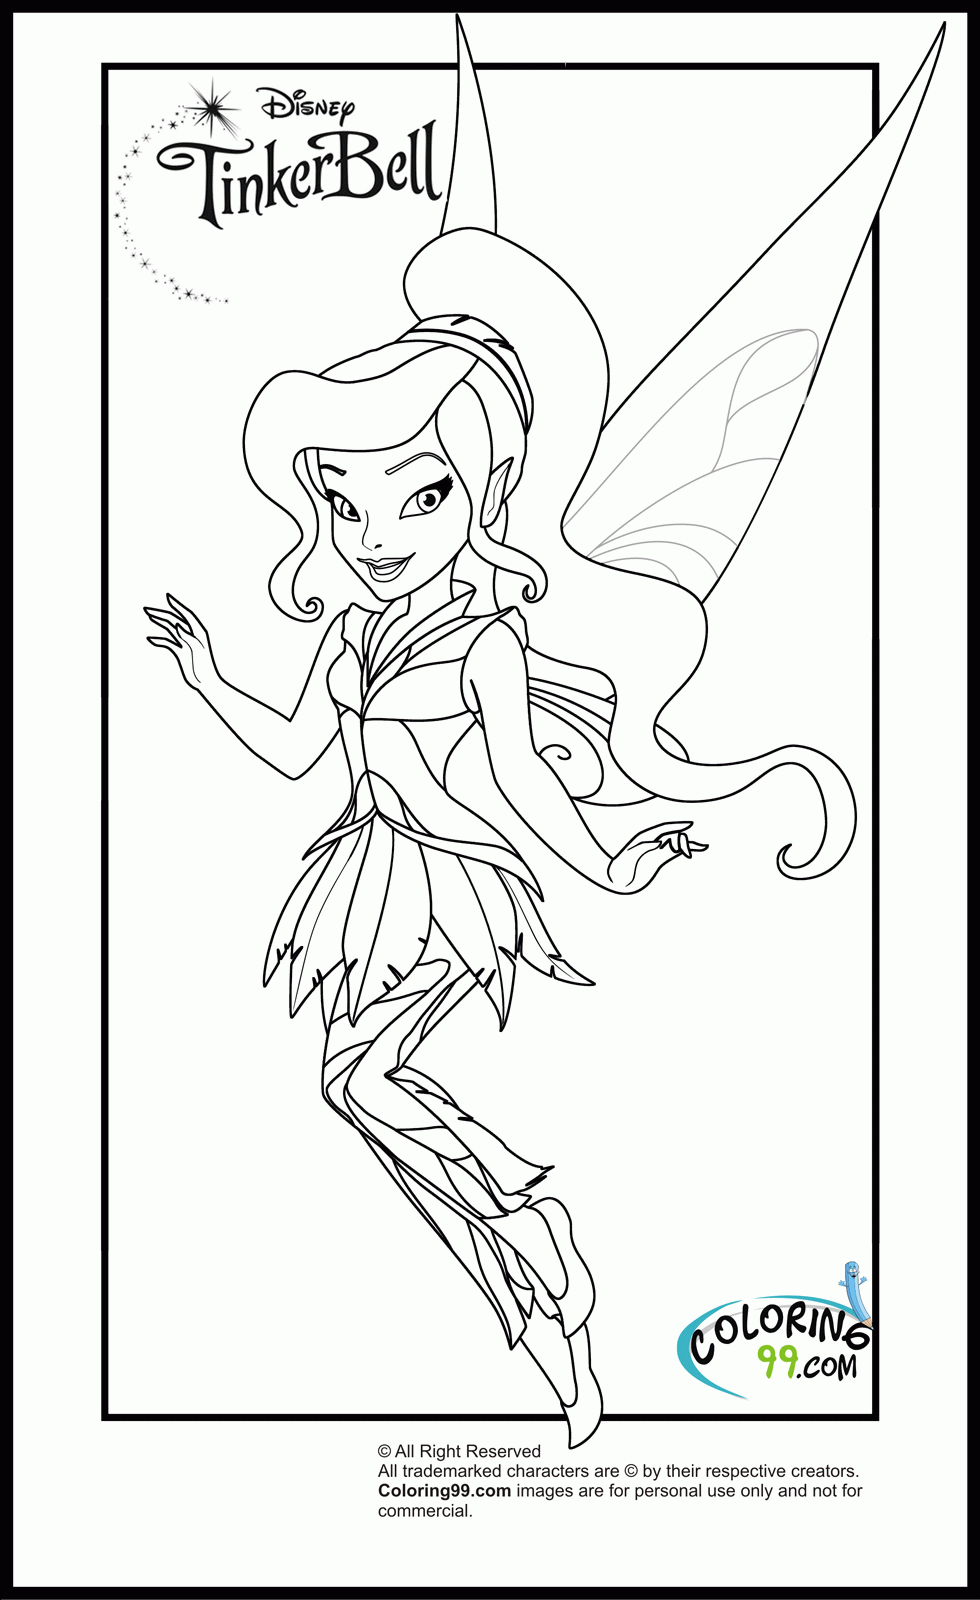 Tinkerbell and Friends Coloring Pages | Team colors